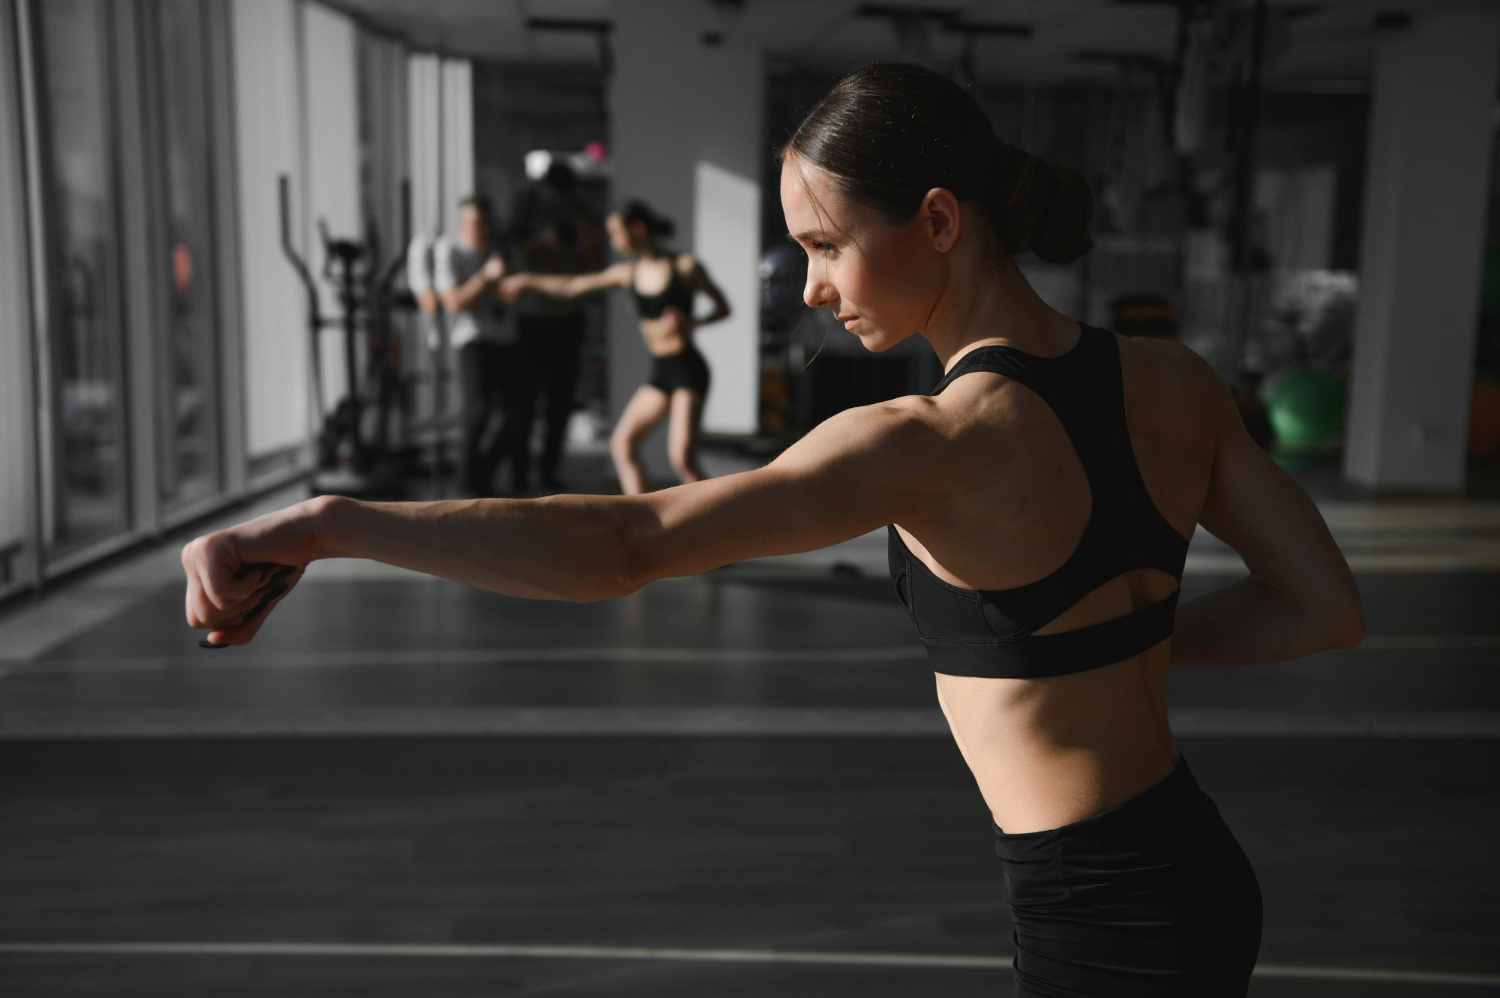 boxing woman during exercisegray background